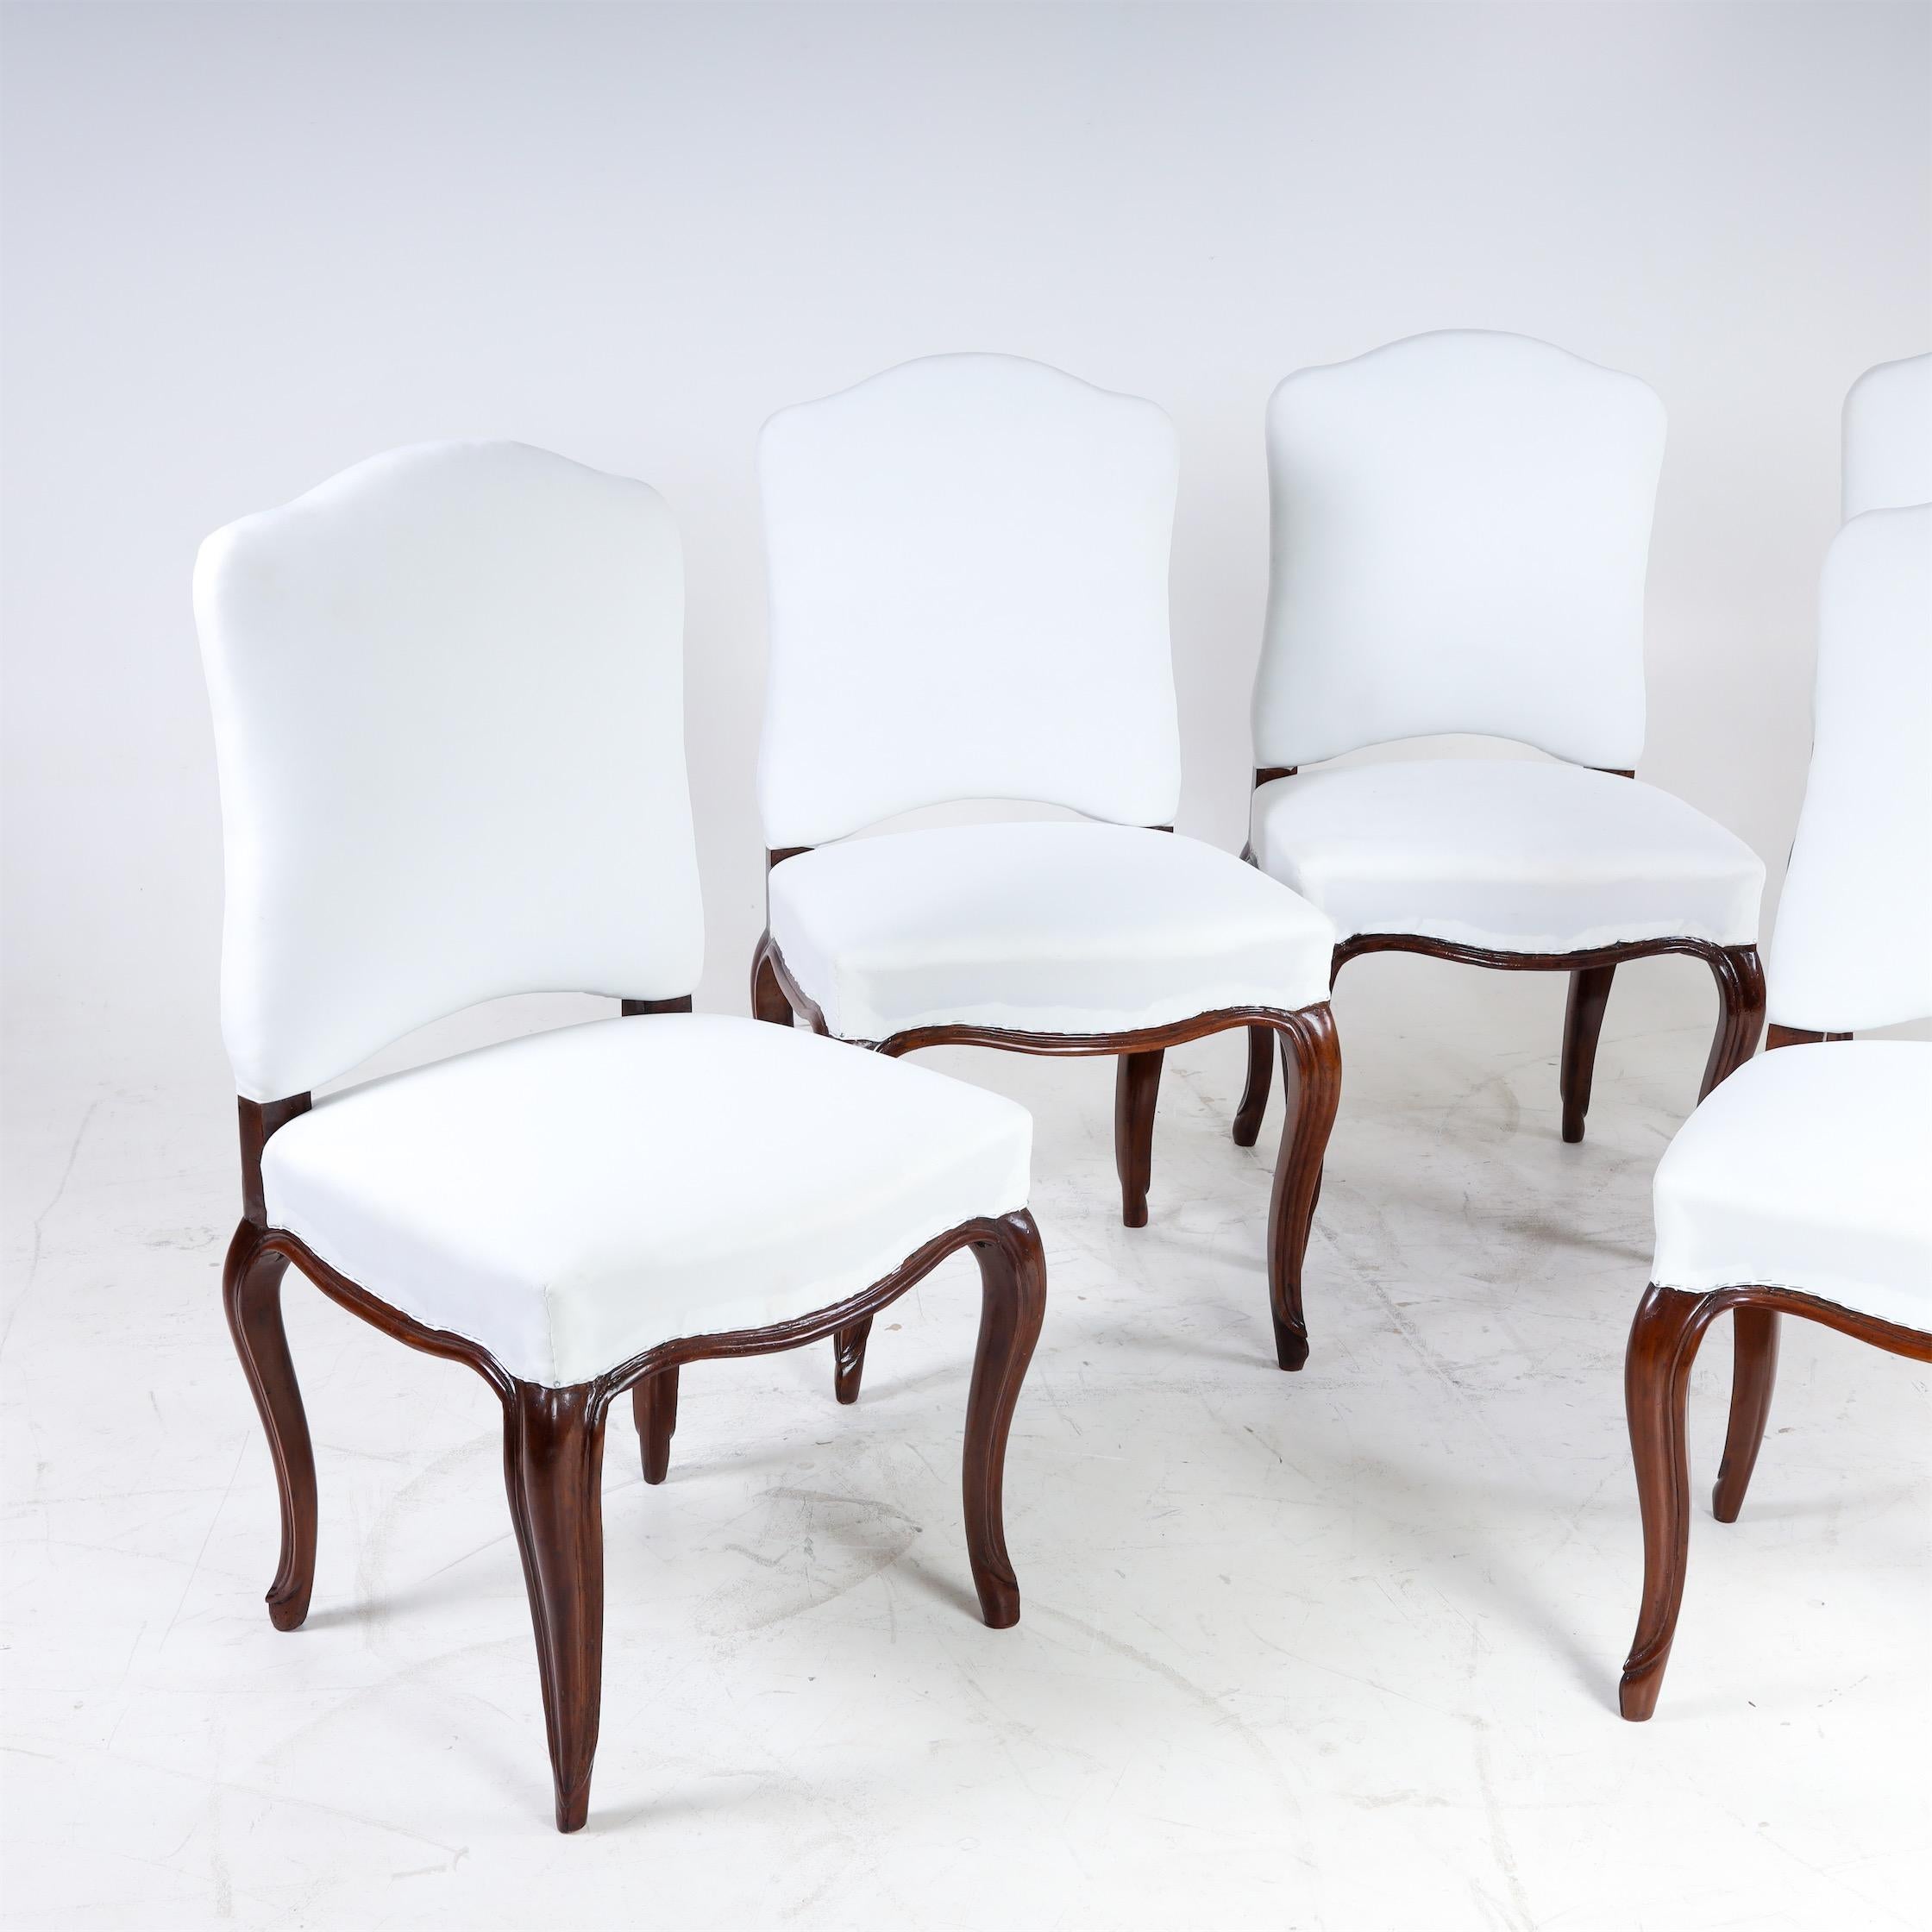 Set of five Baroque chairs on curved S-legs with upholstered seat and backrest. The chairs were expertly finished and covered with a white base fabric.